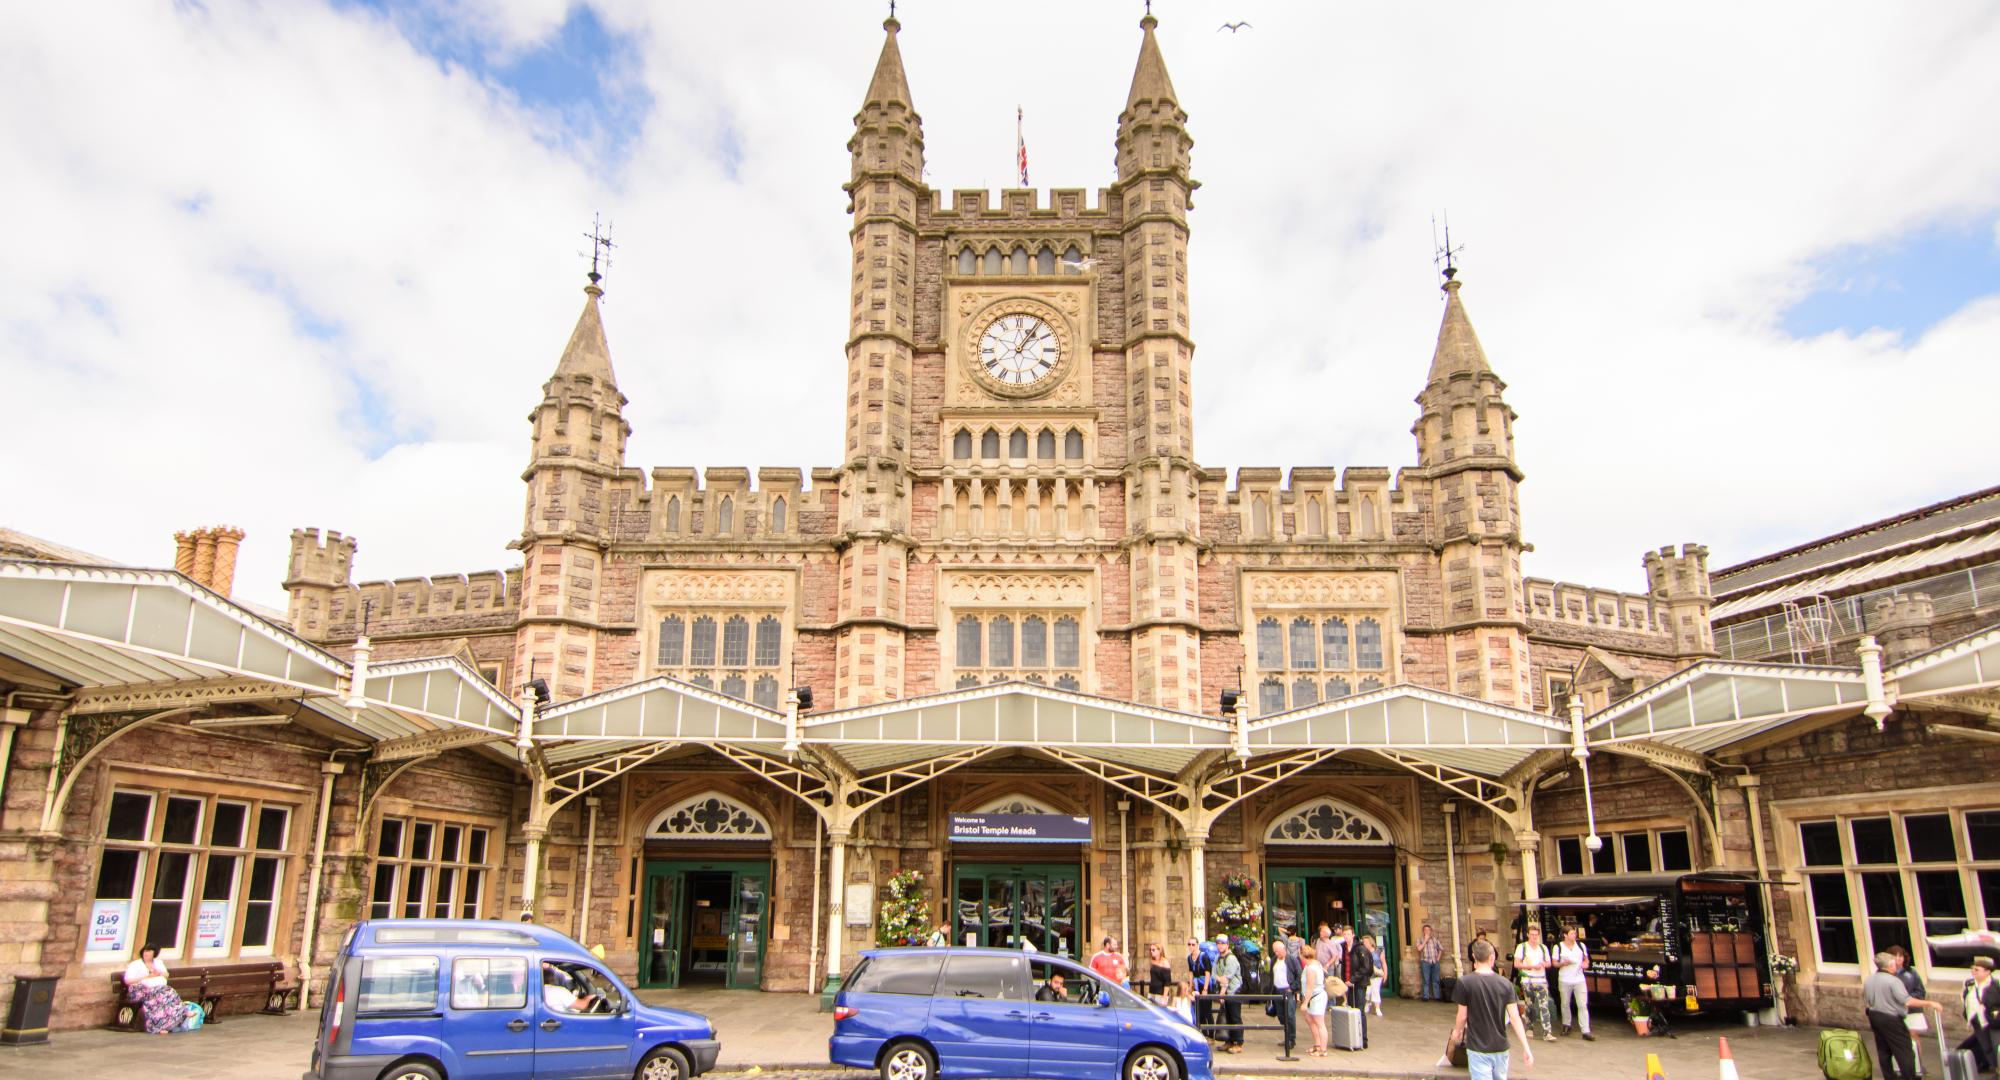 Bristol Temple Meads Station on the Great Western Railway, via Istock 